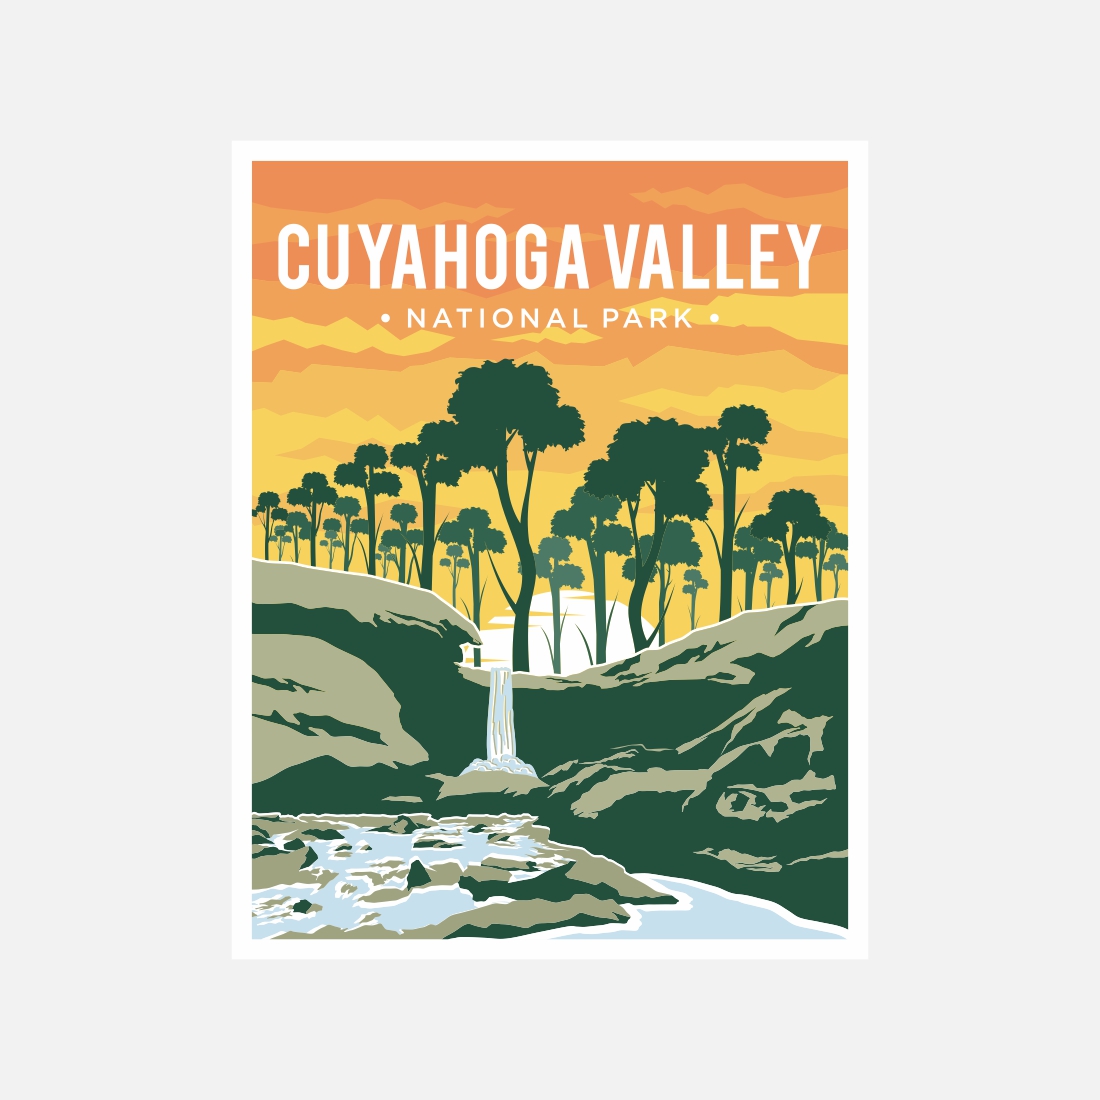 Cuyahoga Valley National Park poster vector illustration design – Only $8 cover image.